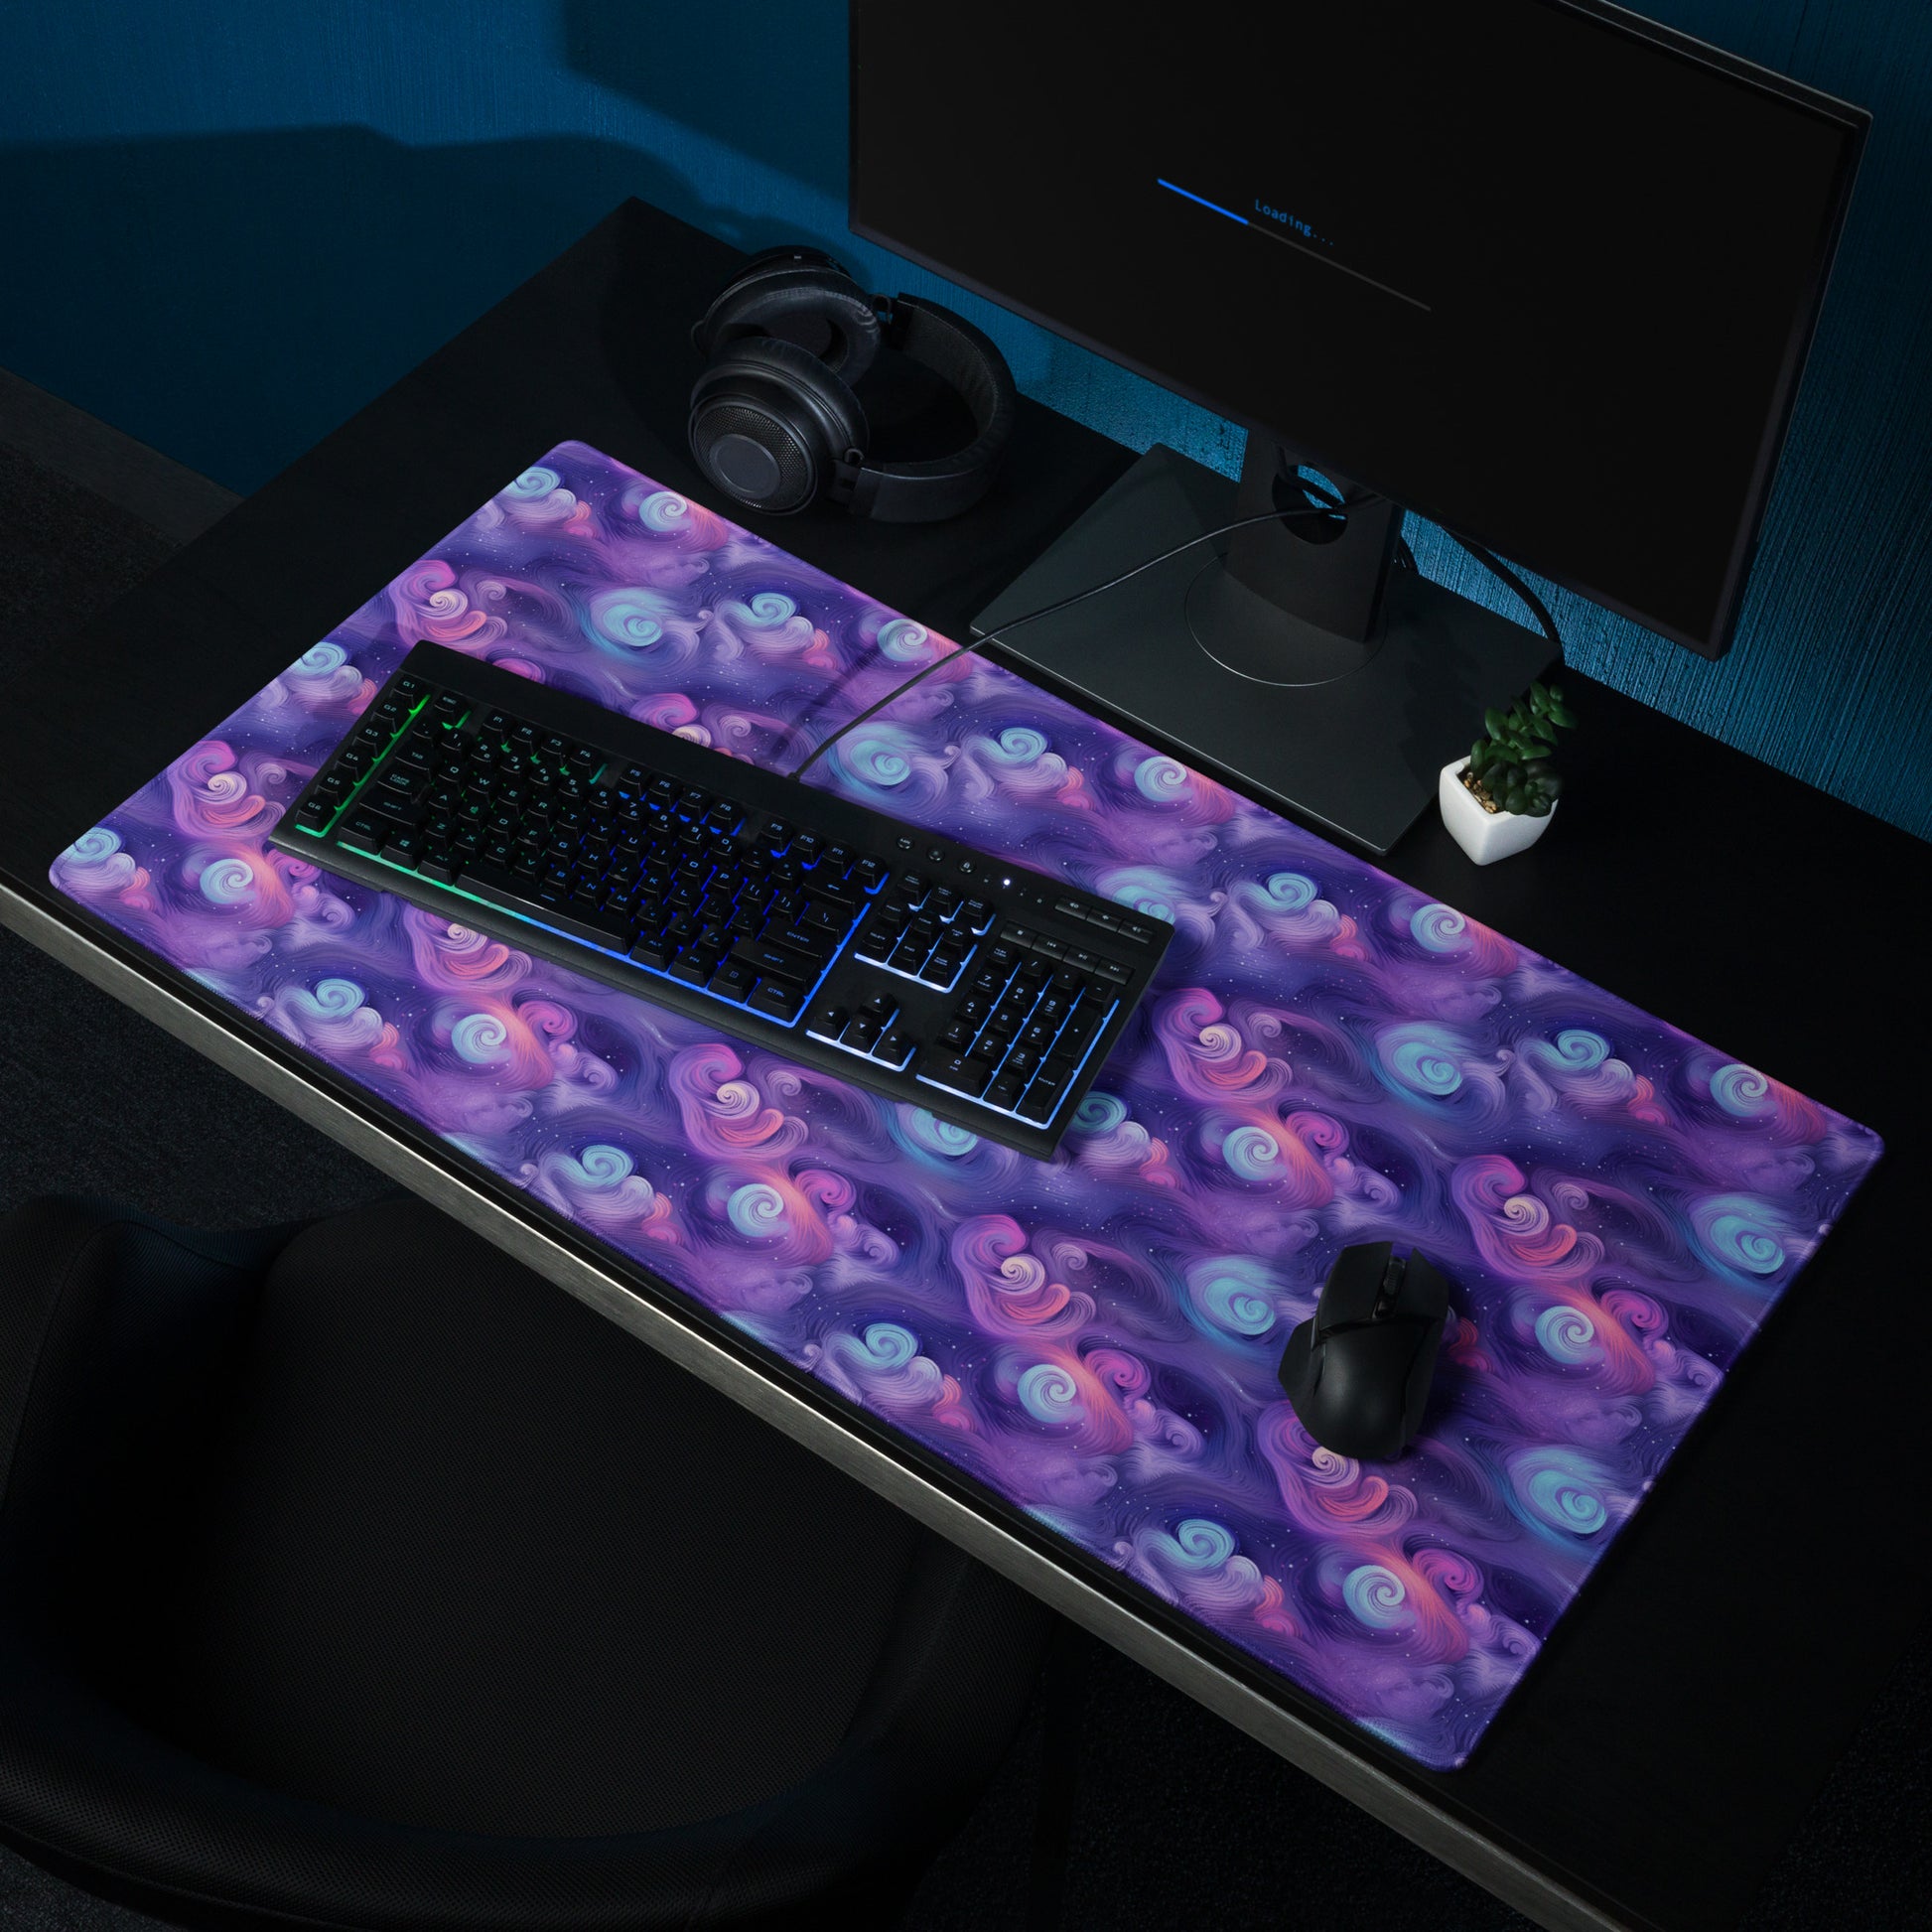 A 36" x 18" desk pad with fluffy clouds and stars on it shown on a desk setup. Blue and Purple in color